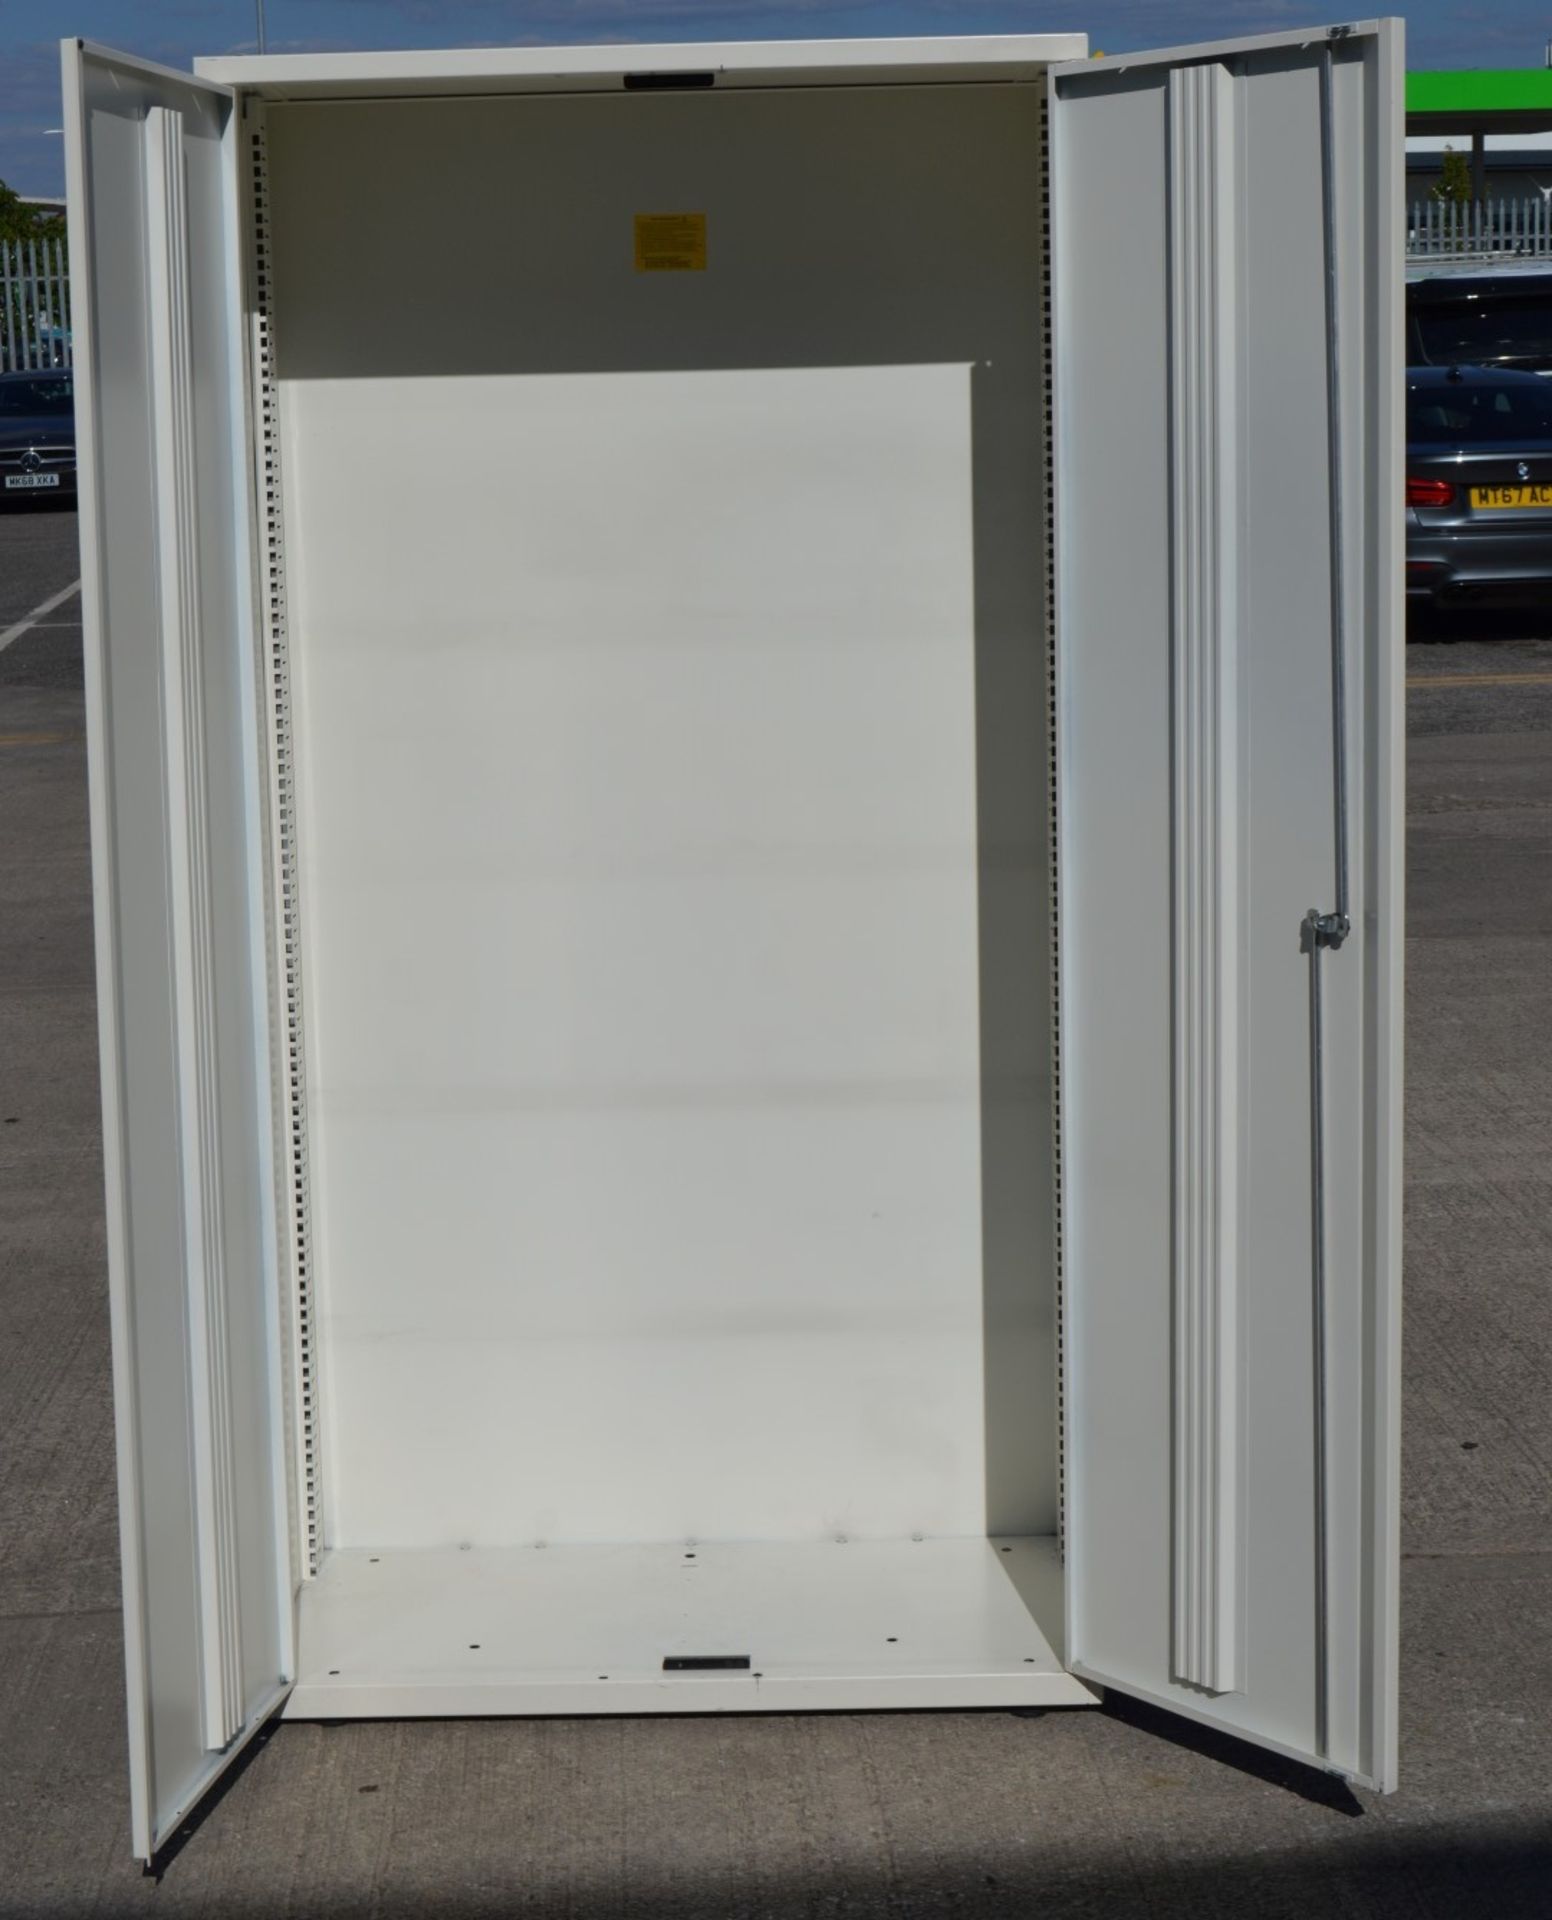 1 x Large BISLEY Metal Office Storage Cabinet With Key - Dimensions: H195 x W80 x D47cm - Used - Image 3 of 4